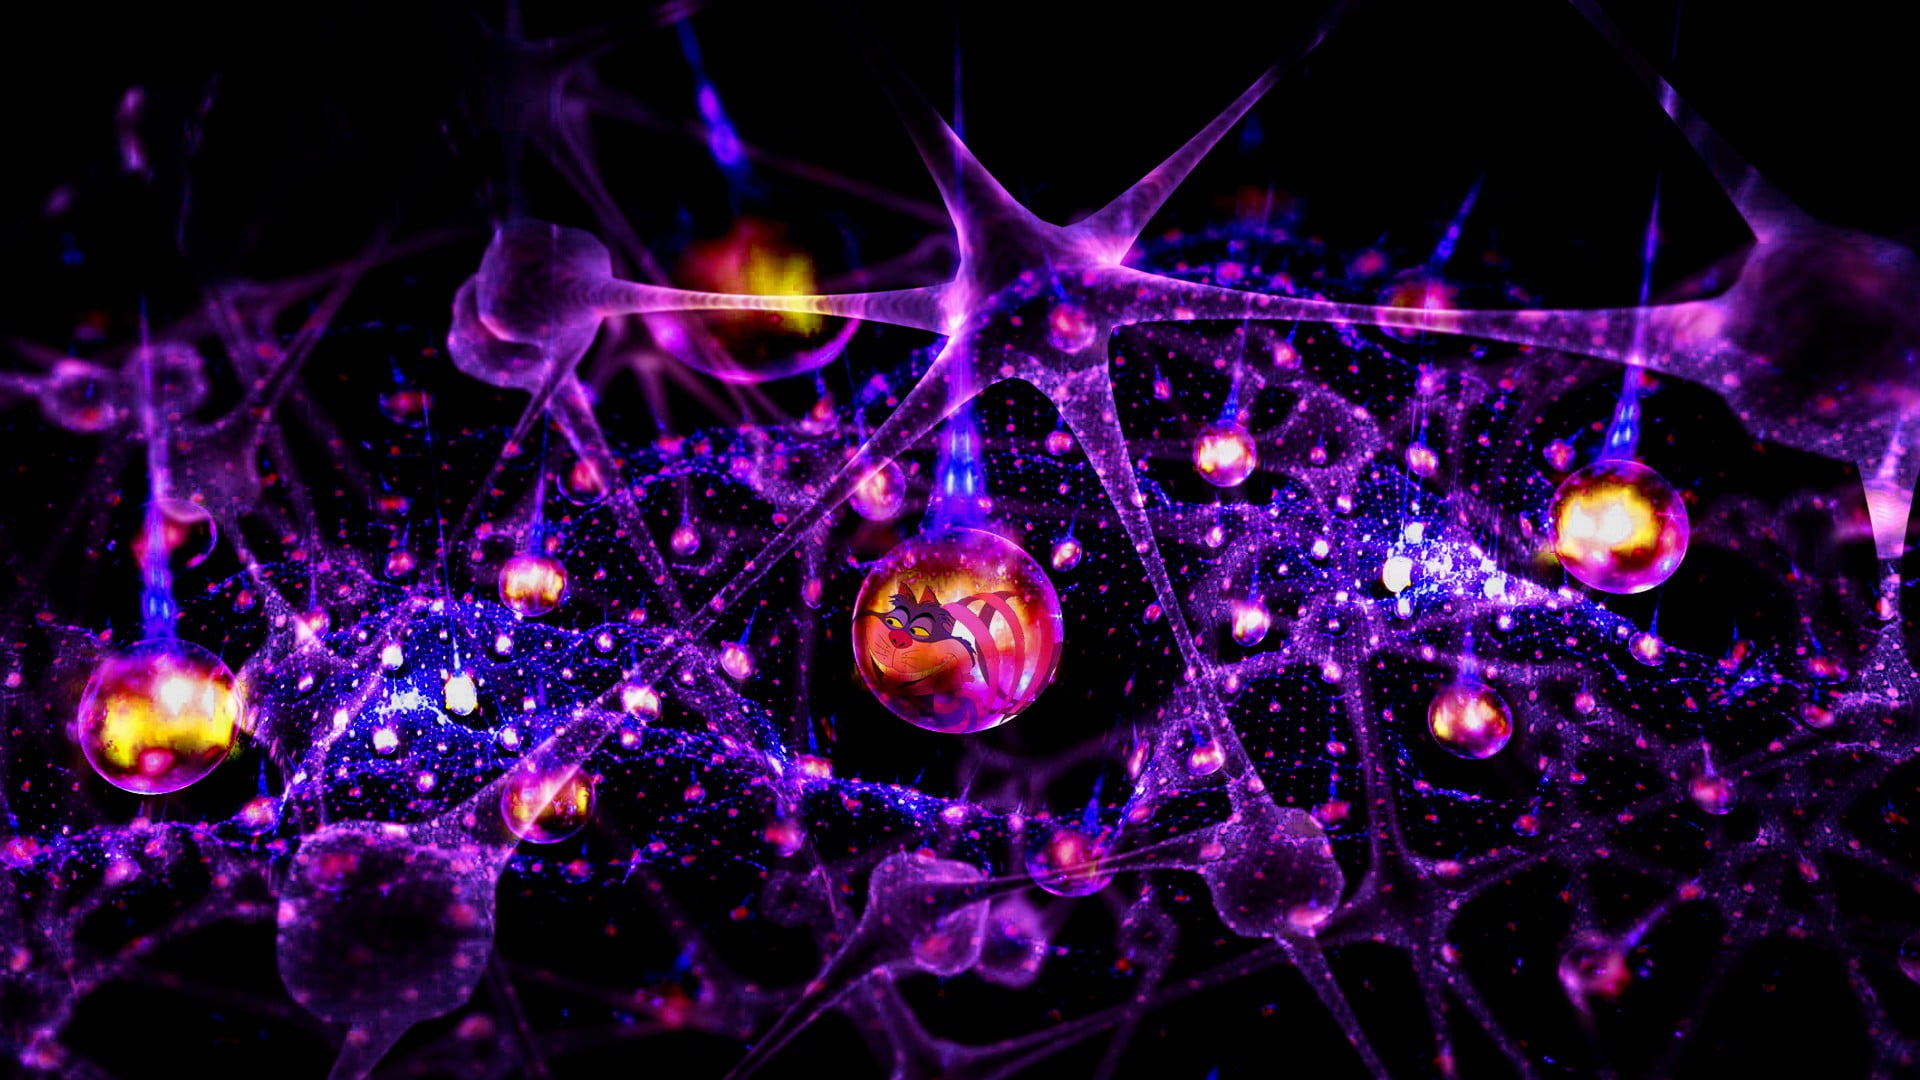 purple and orange cell illustration, abstract, render, colorful